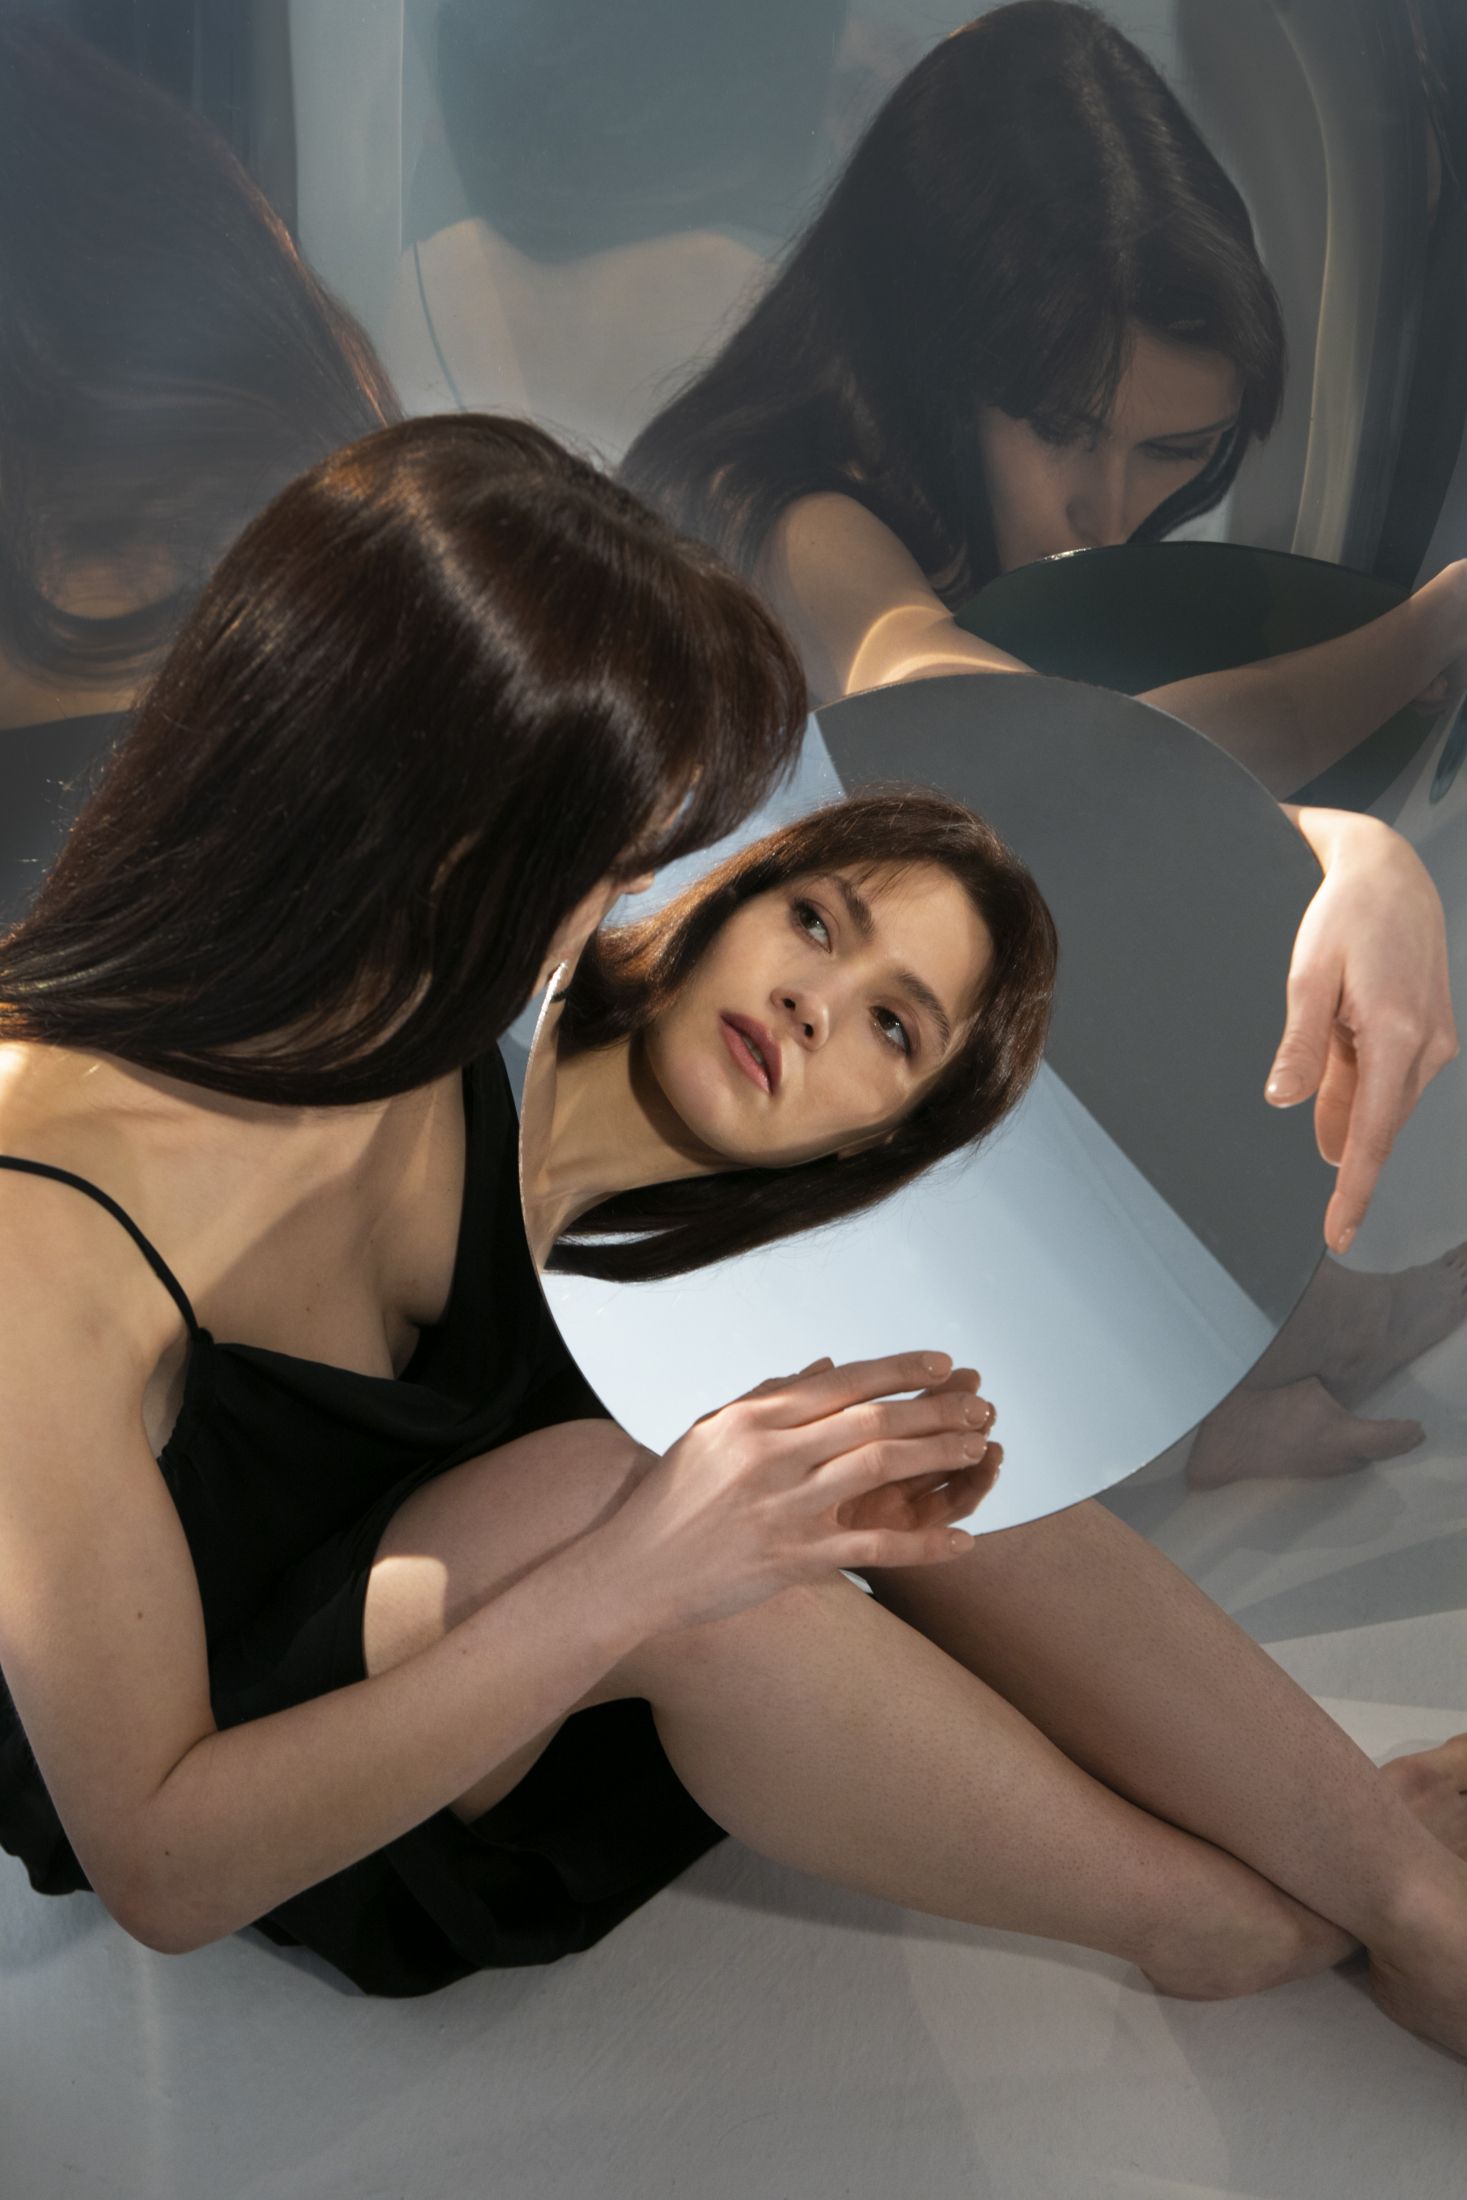 young-woman-posing-with-mirror-reflection (2).jpg